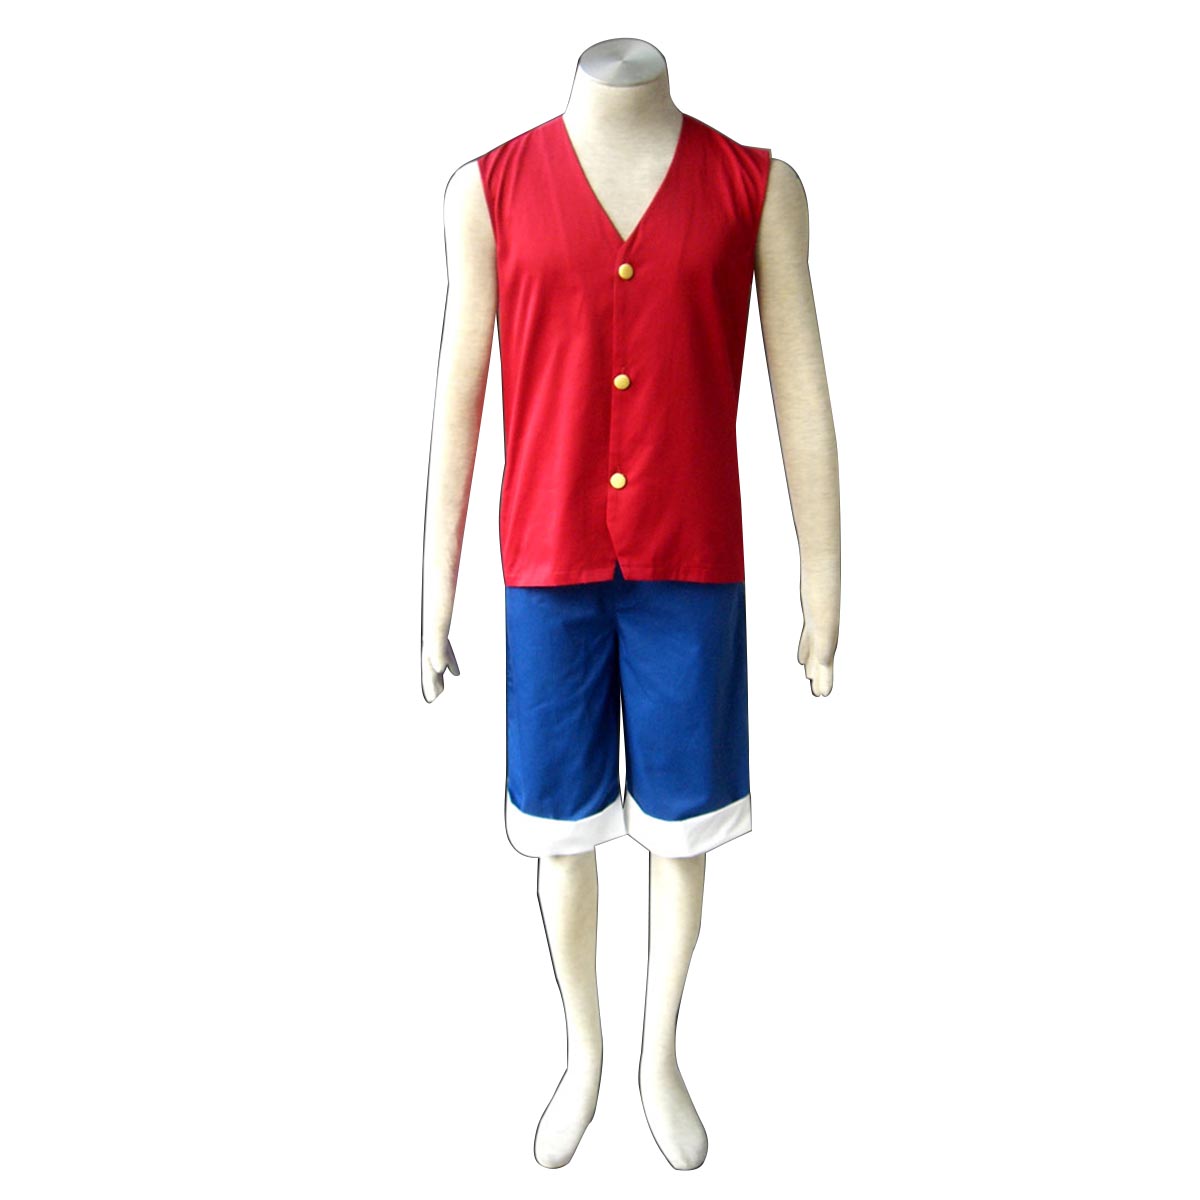 One Piece Monkey D. Luffy 1 Red Anime Cosplay Costumes Outfit